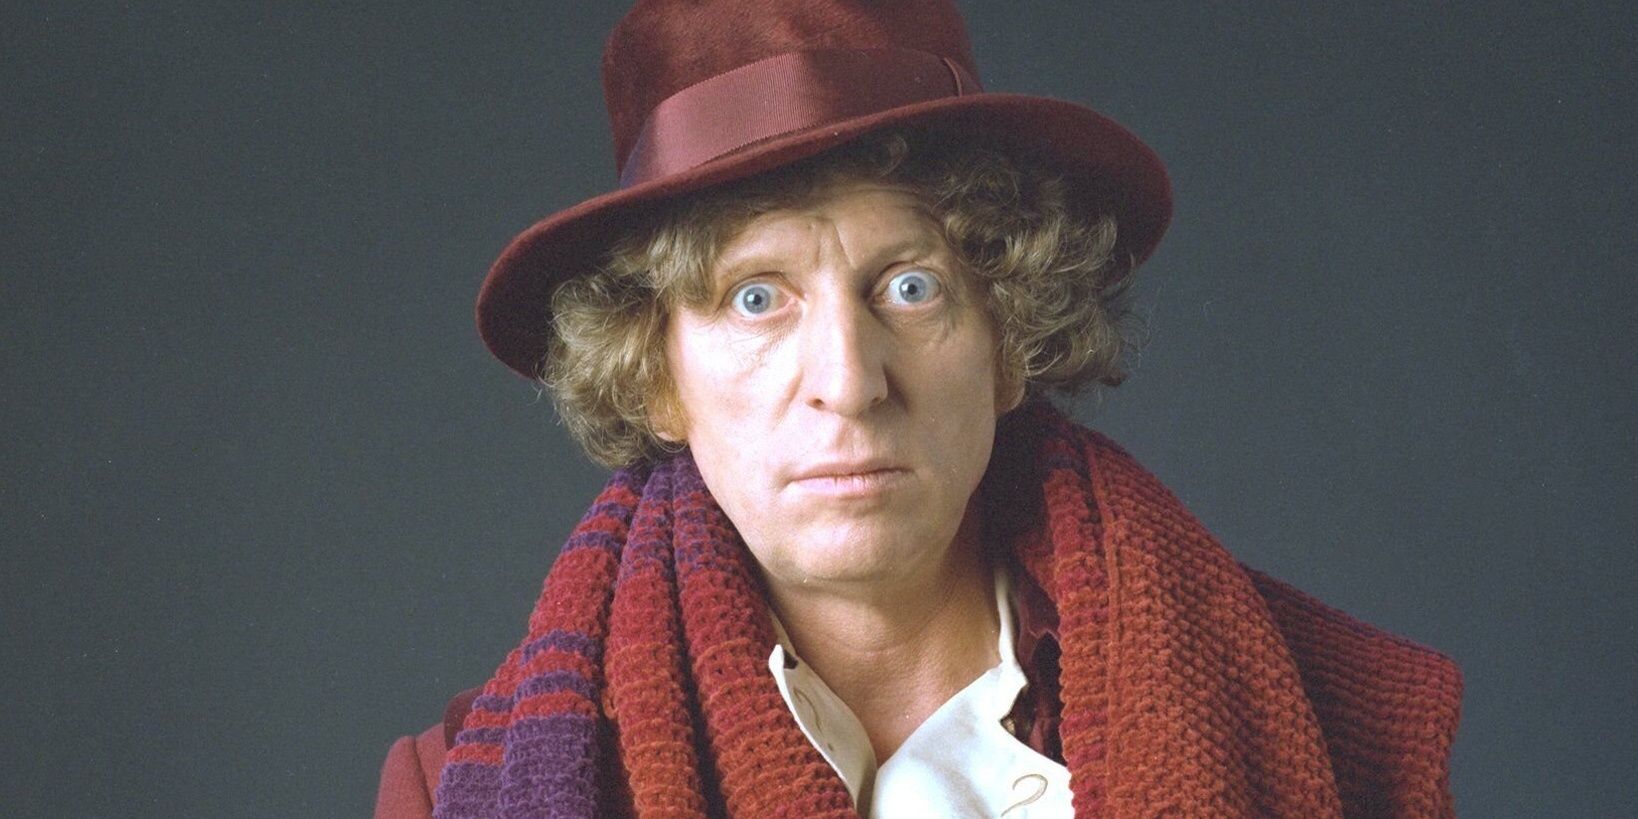 The Fourth Doctor in Season 18